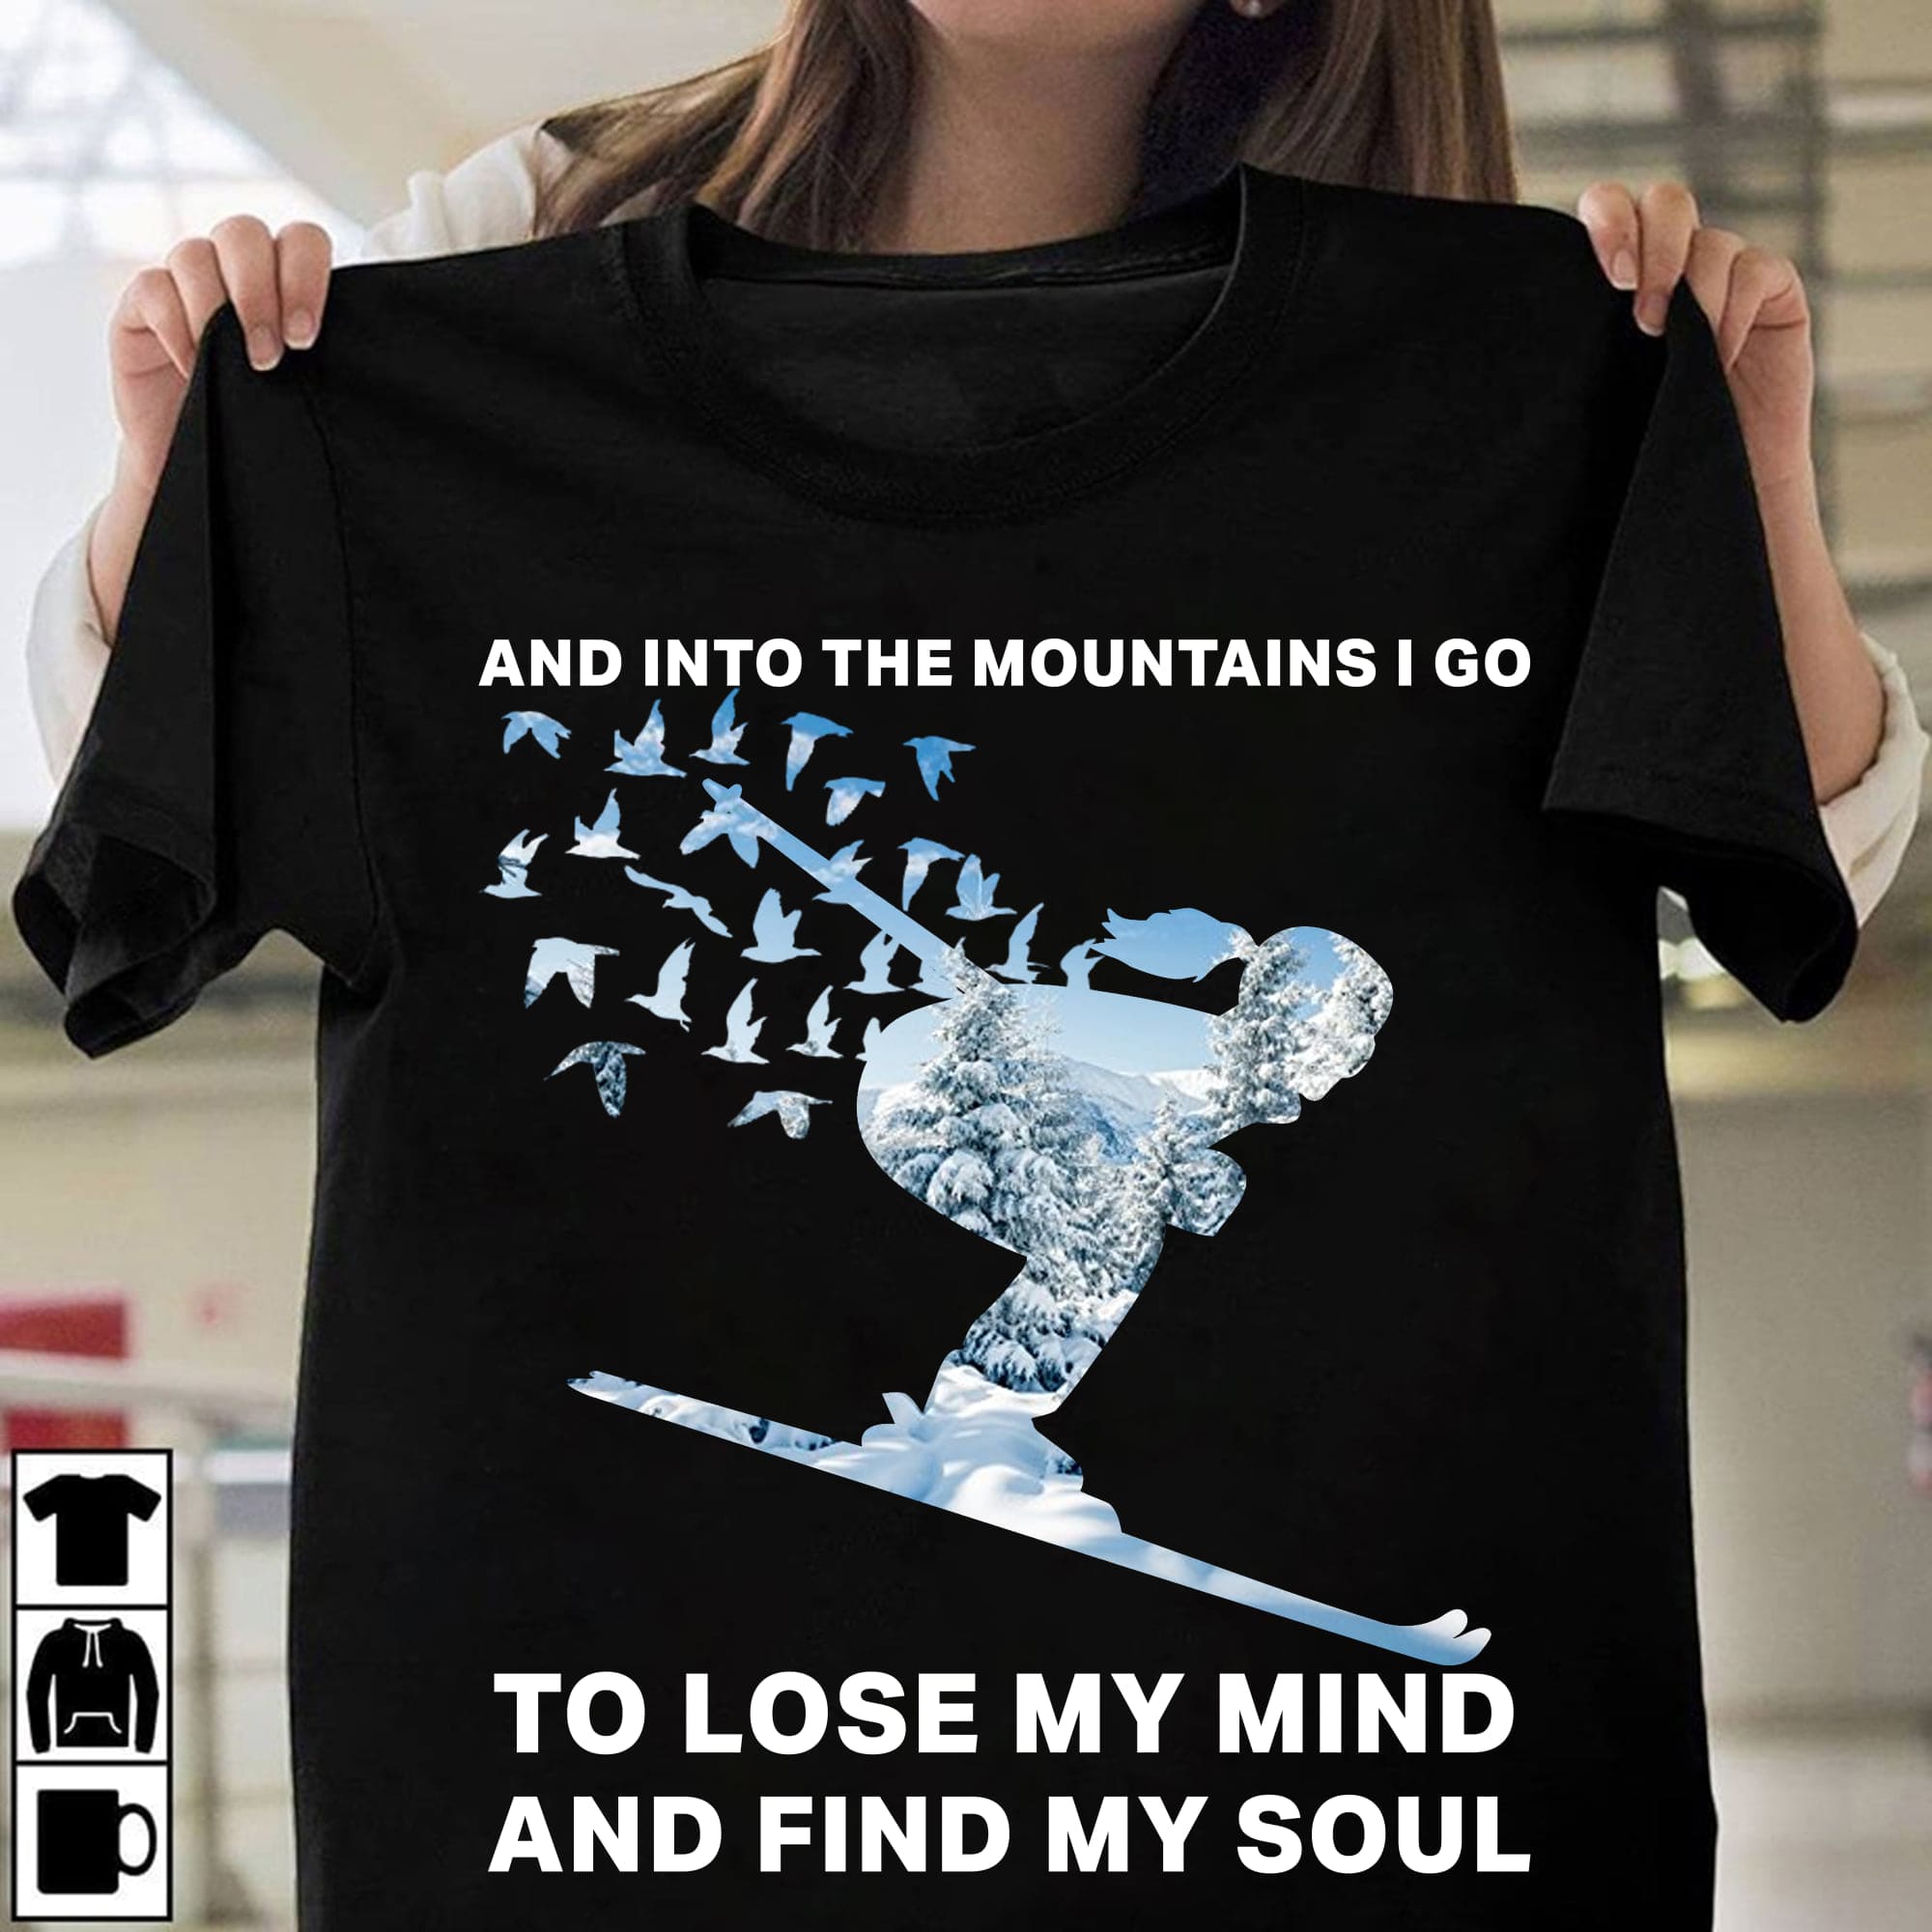 And into the mountains I go to lose my mind and find my soul - Girl go skiing, skiing risky sport